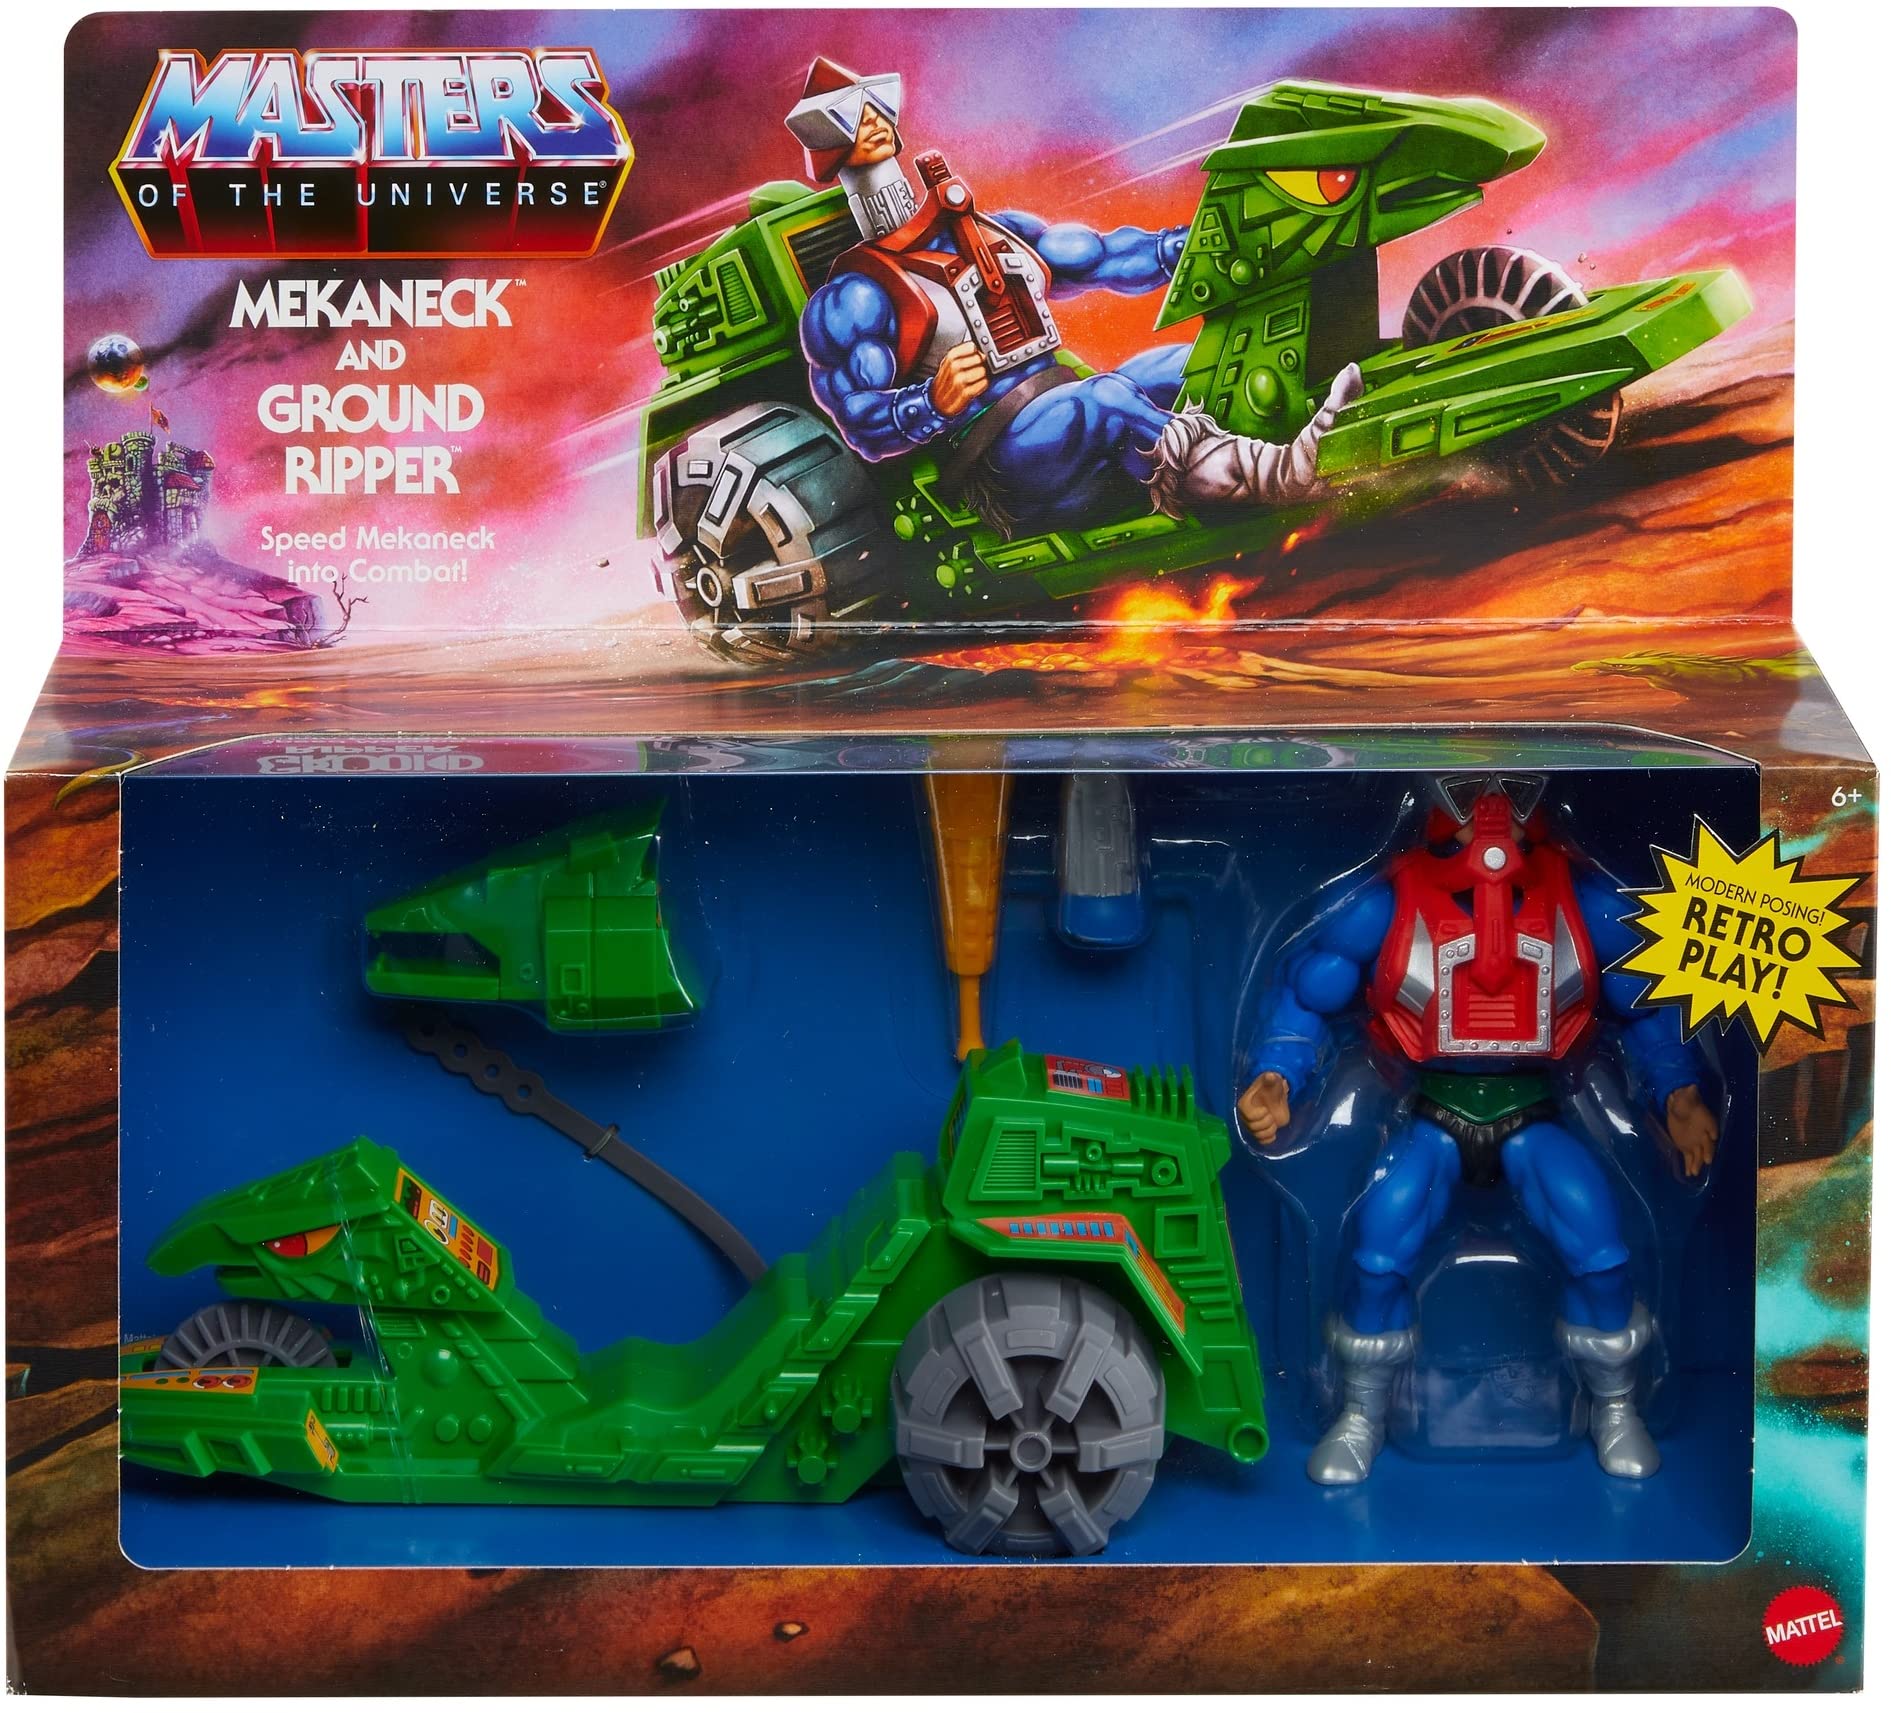 Masters of the Universe Origins Action Figure & Vehicle, Ground Ripper & Mekaneck, 80S Inspired MOTU Toy with Accessories